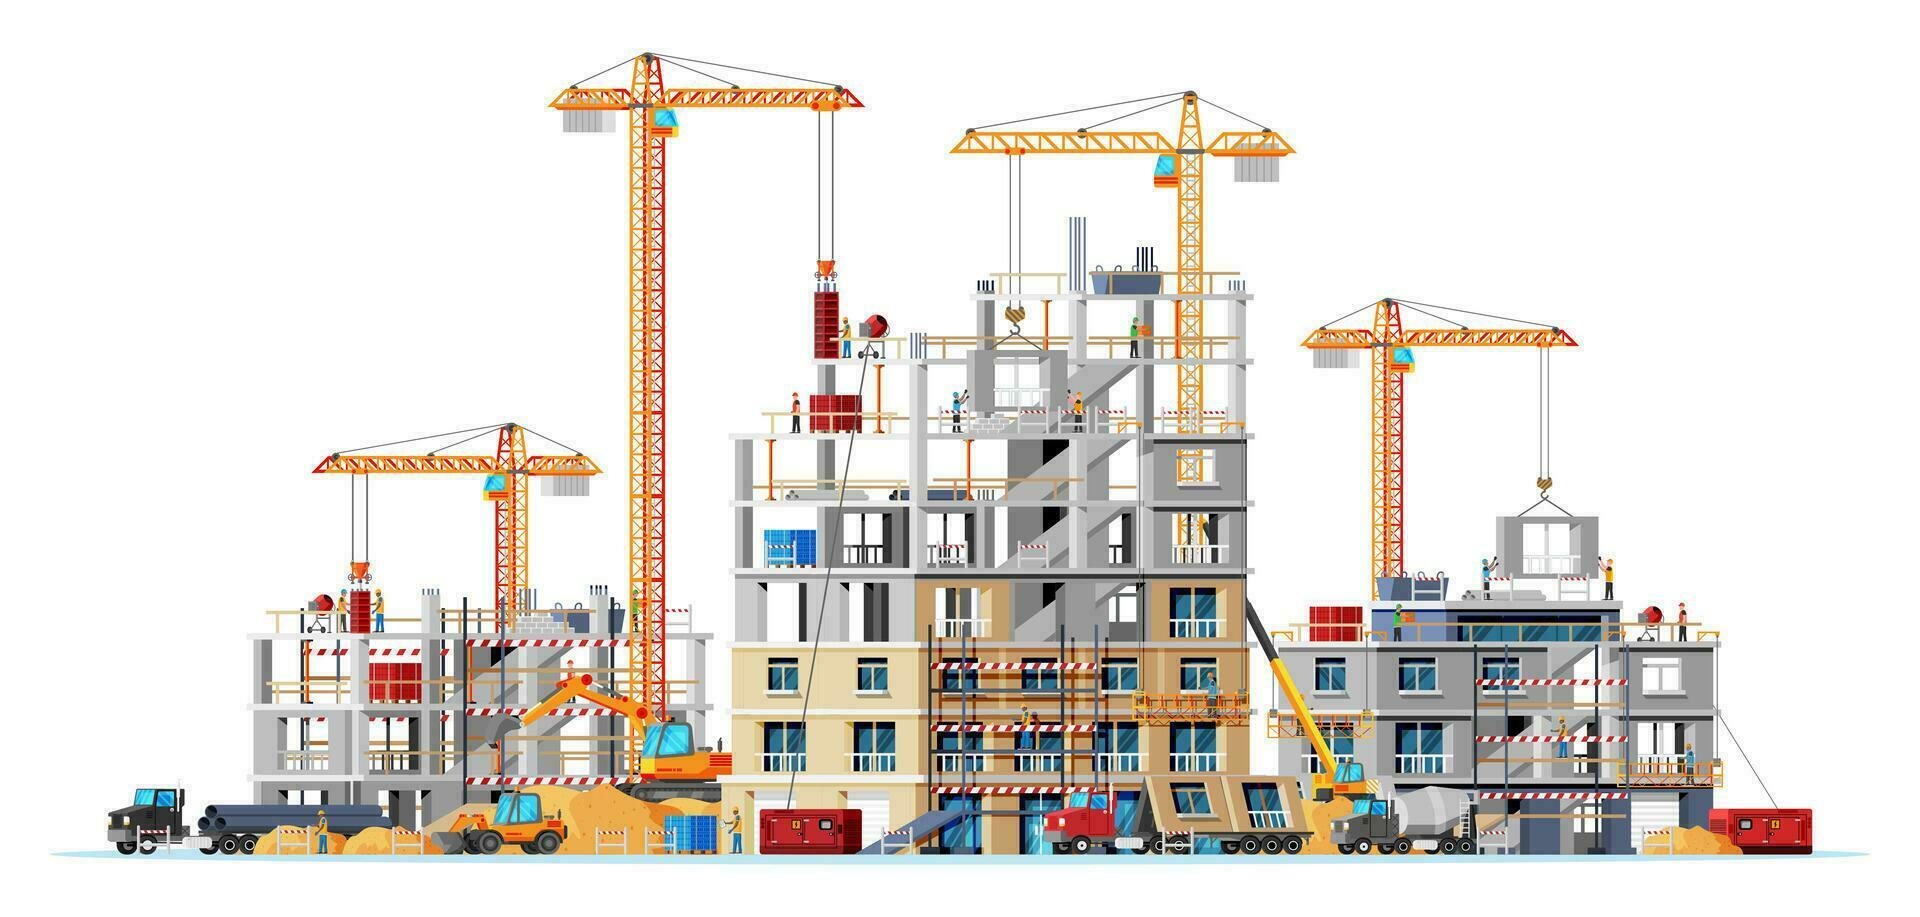 Construction Site Banner. Truck car, Workers, Concrete Piles, Tower Crane. Under Construction Design Background. Building Materials and Equipment. Cartoon Flat Vector Illustration